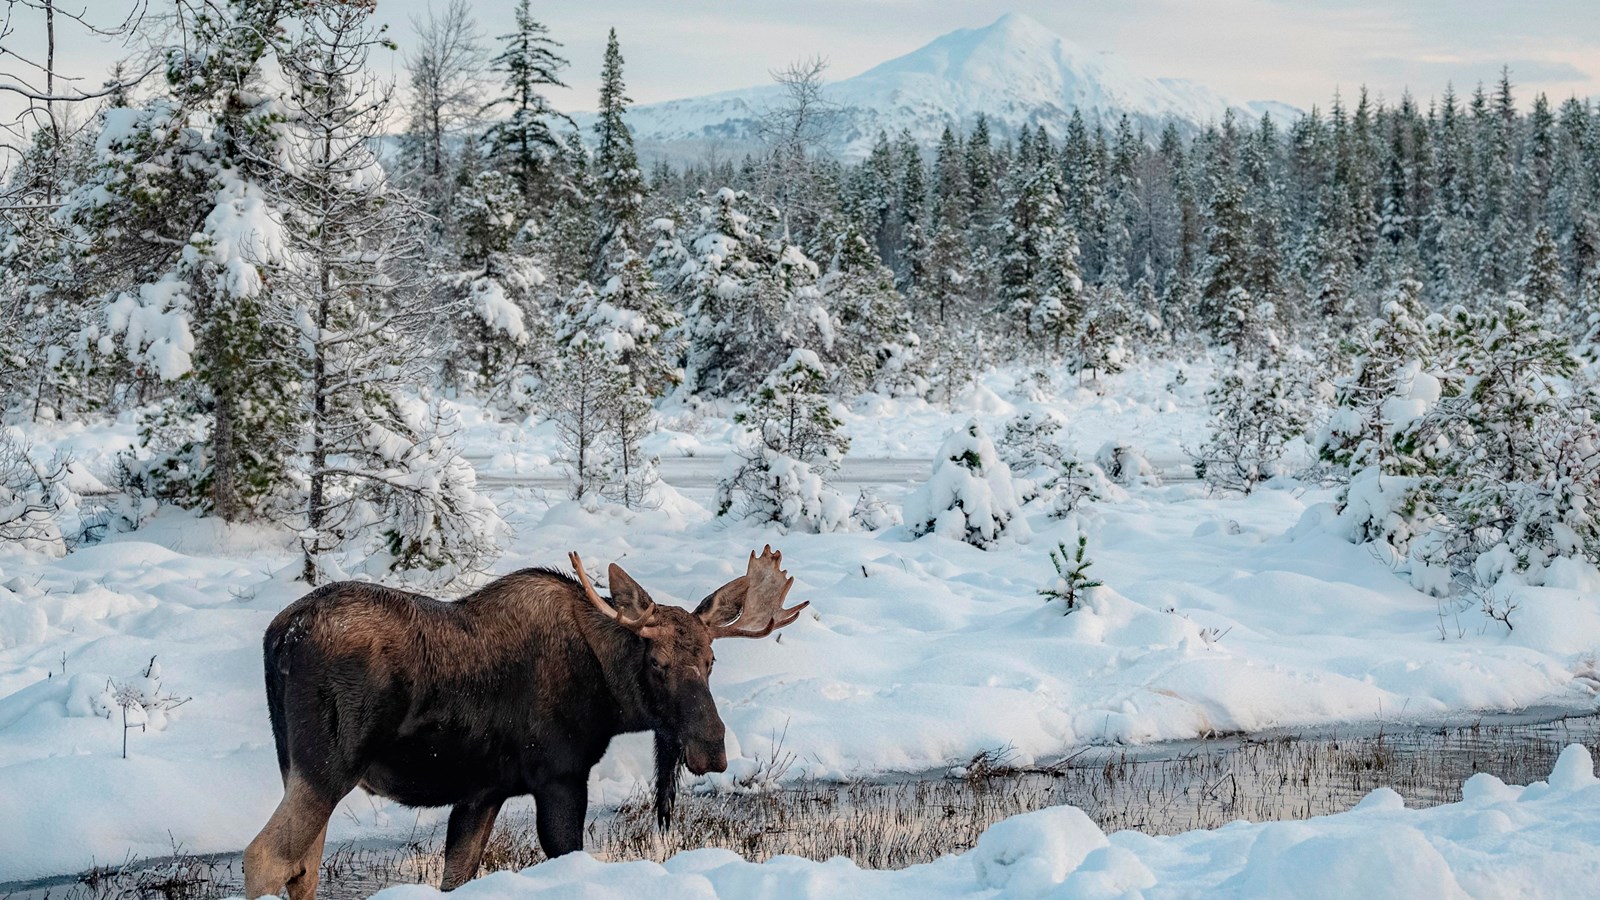 A bull moose with full antler rack stands in open water surrounded by a snow-covered forest